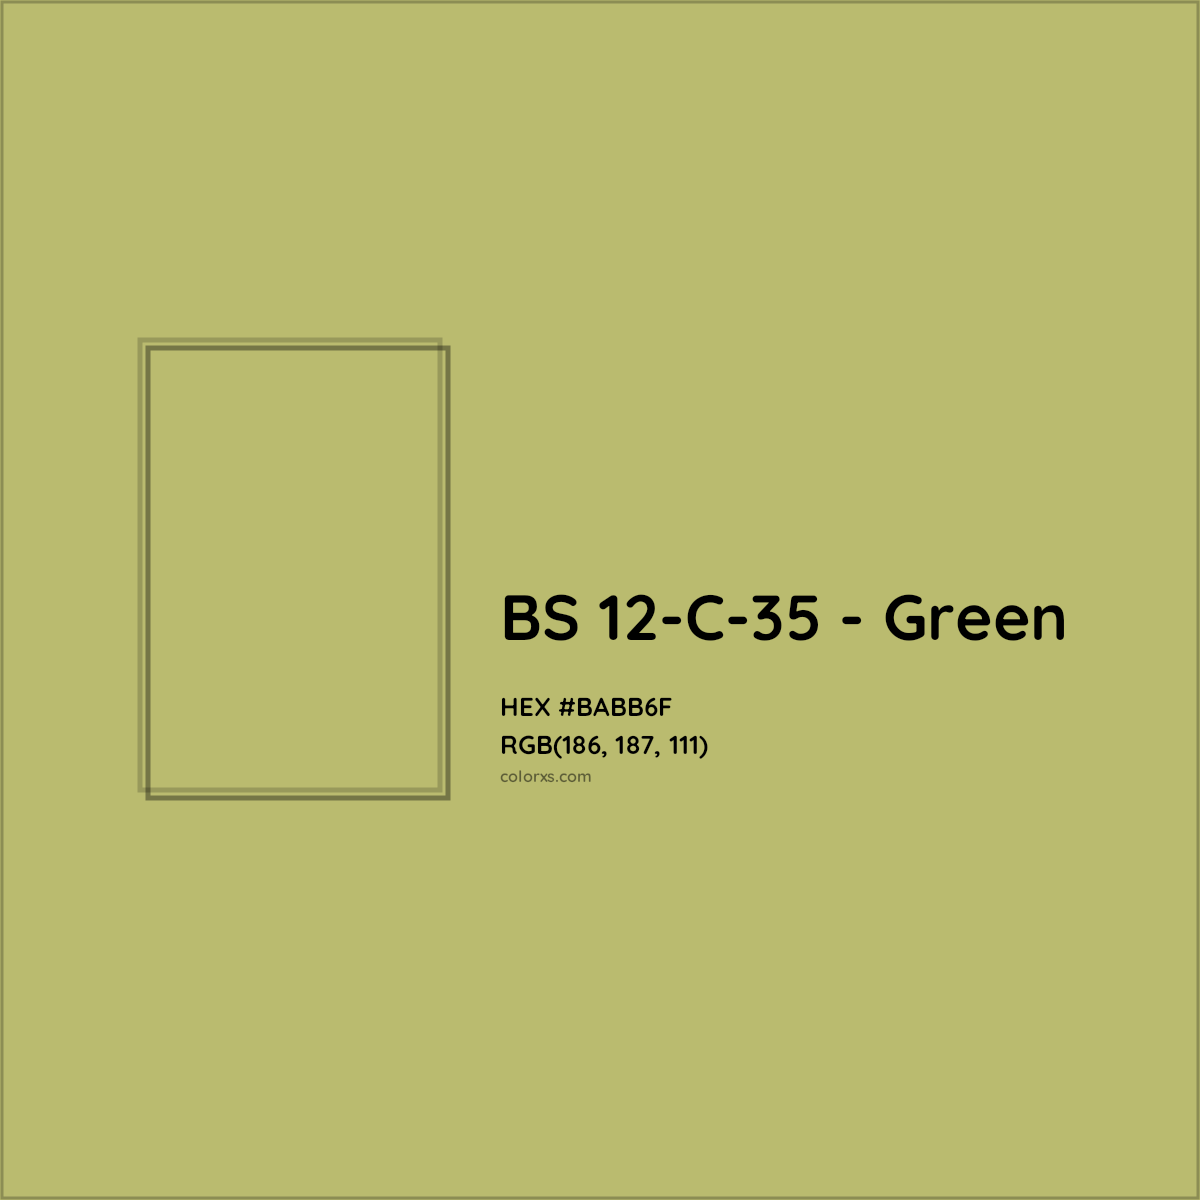 HEX #BABB6F BS 12-C-35 - Green CMS British Standard 4800 - Color Code